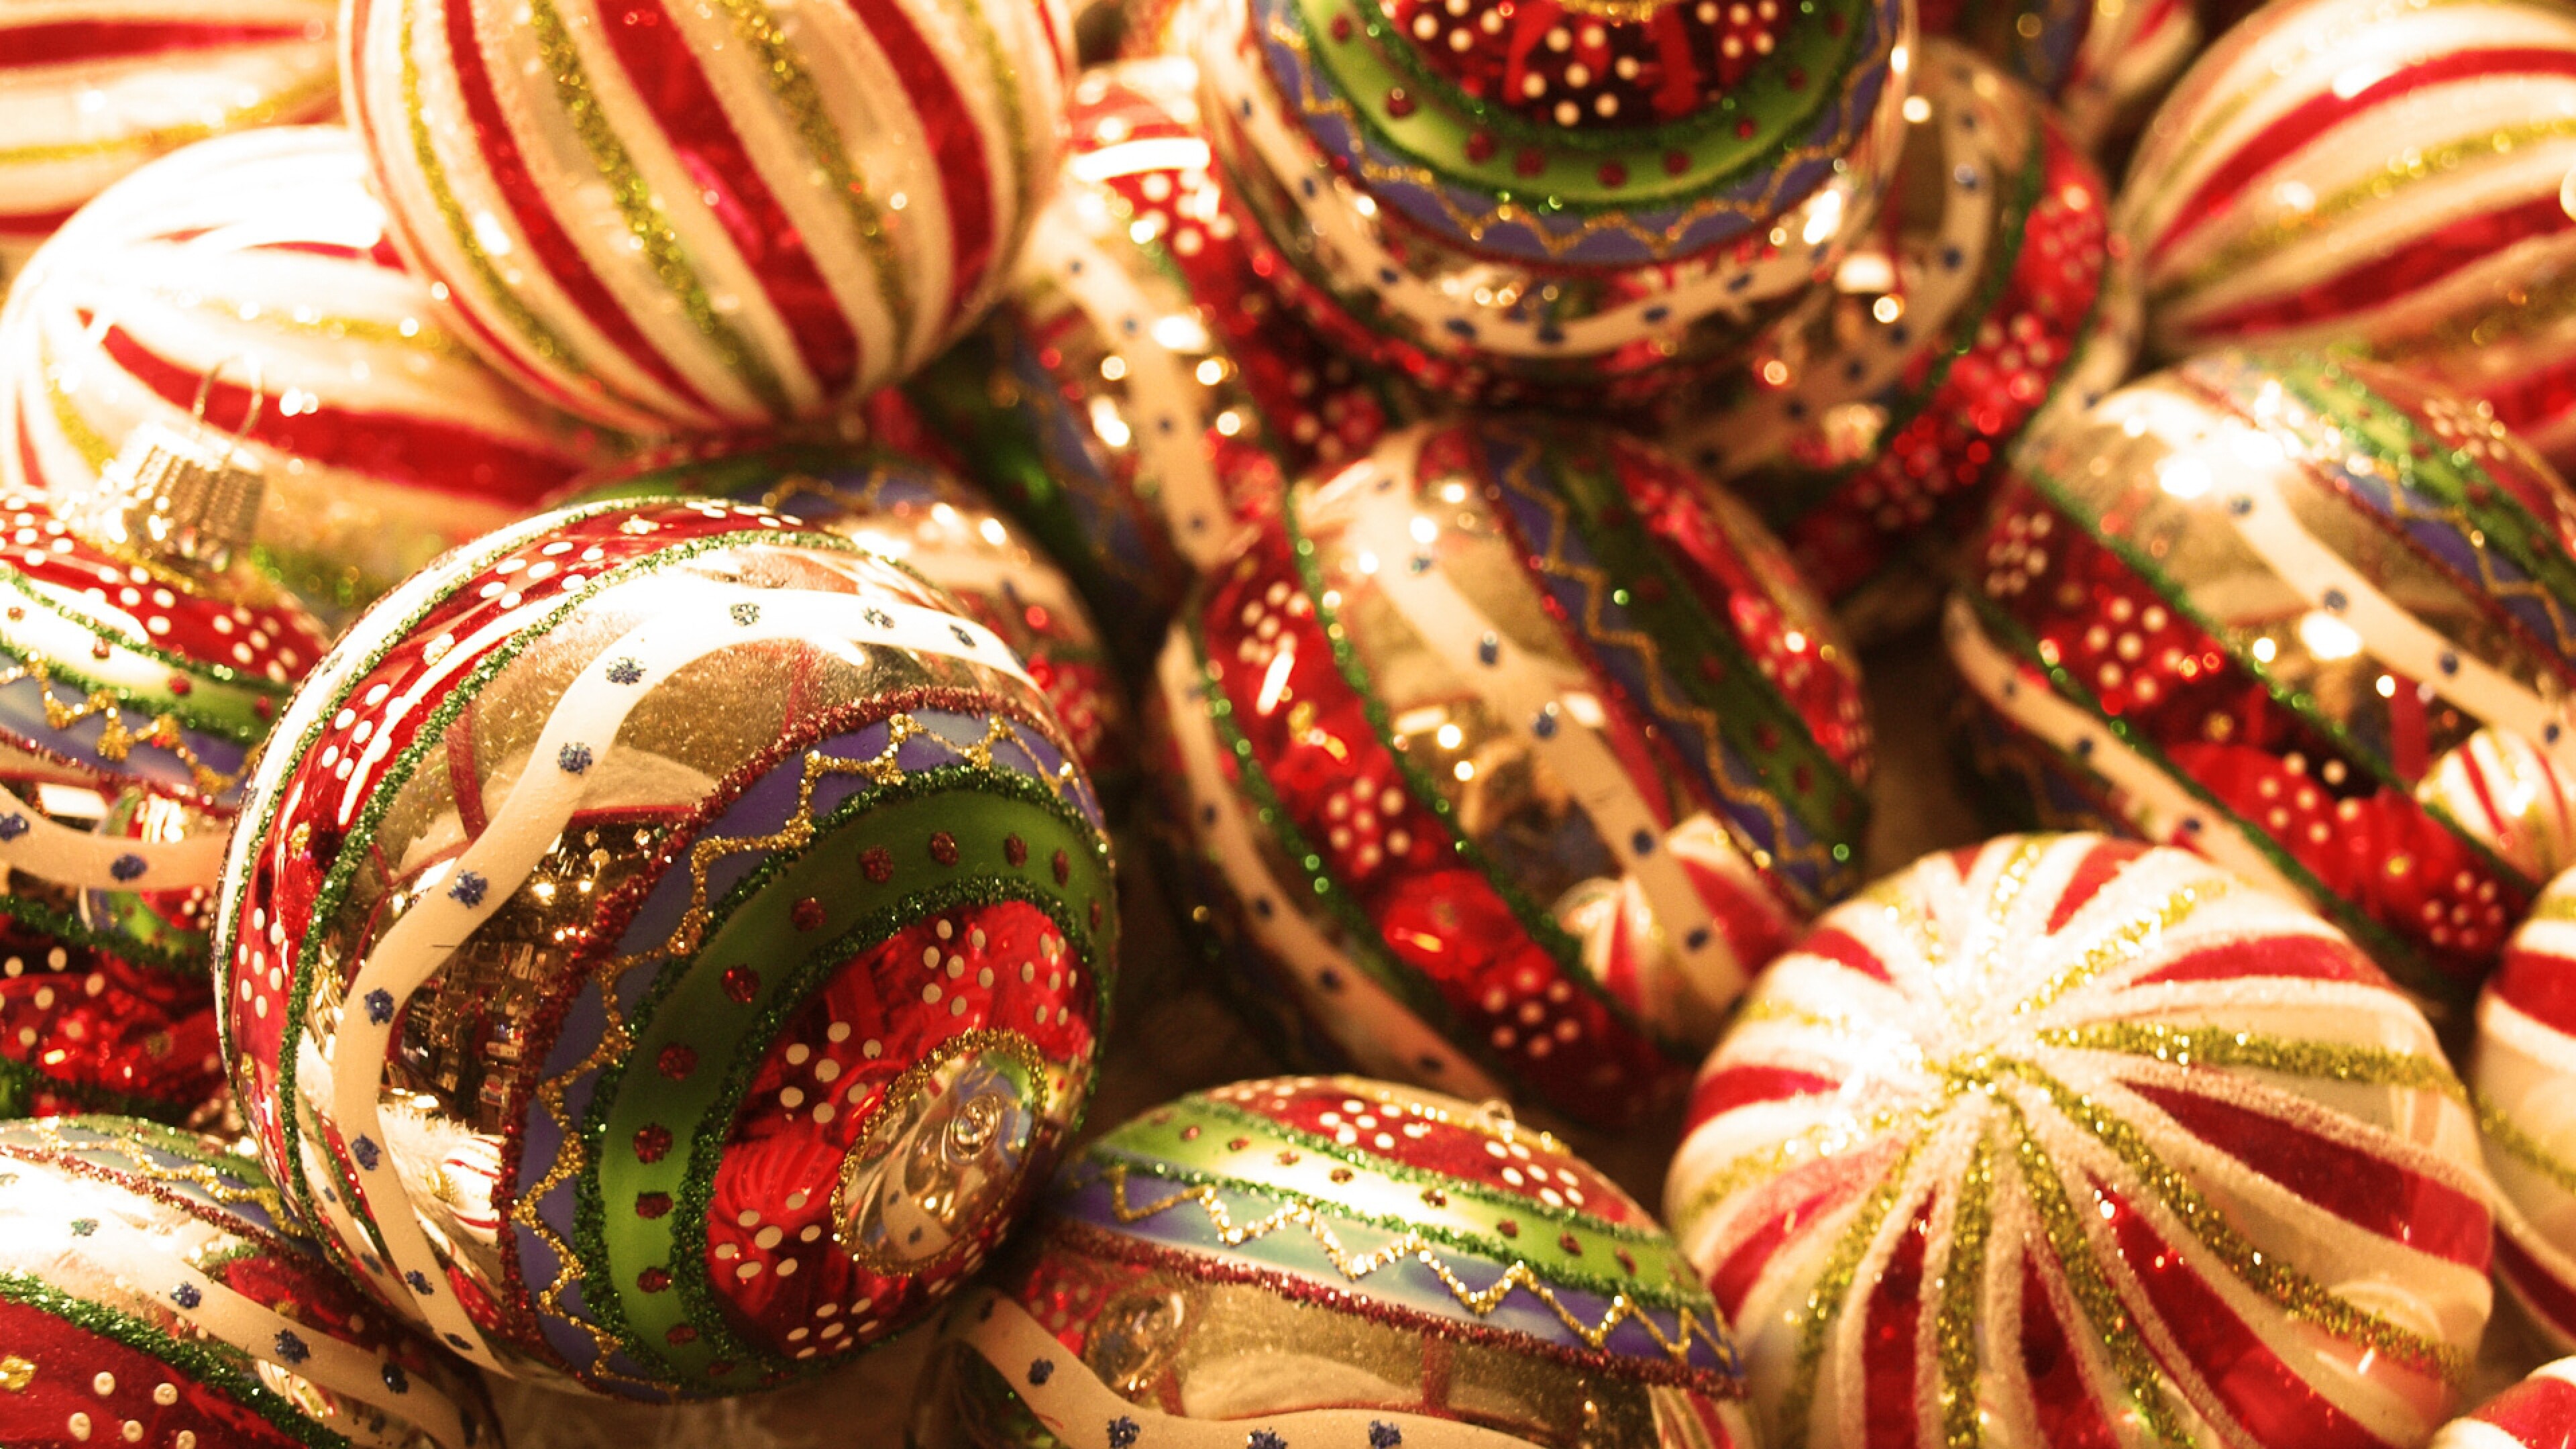 Christmas Ornament: Usually made of blown glass, metal, wood, blown plastics, expanded polystyrene or ceramics. 3840x2160 4K Wallpaper.